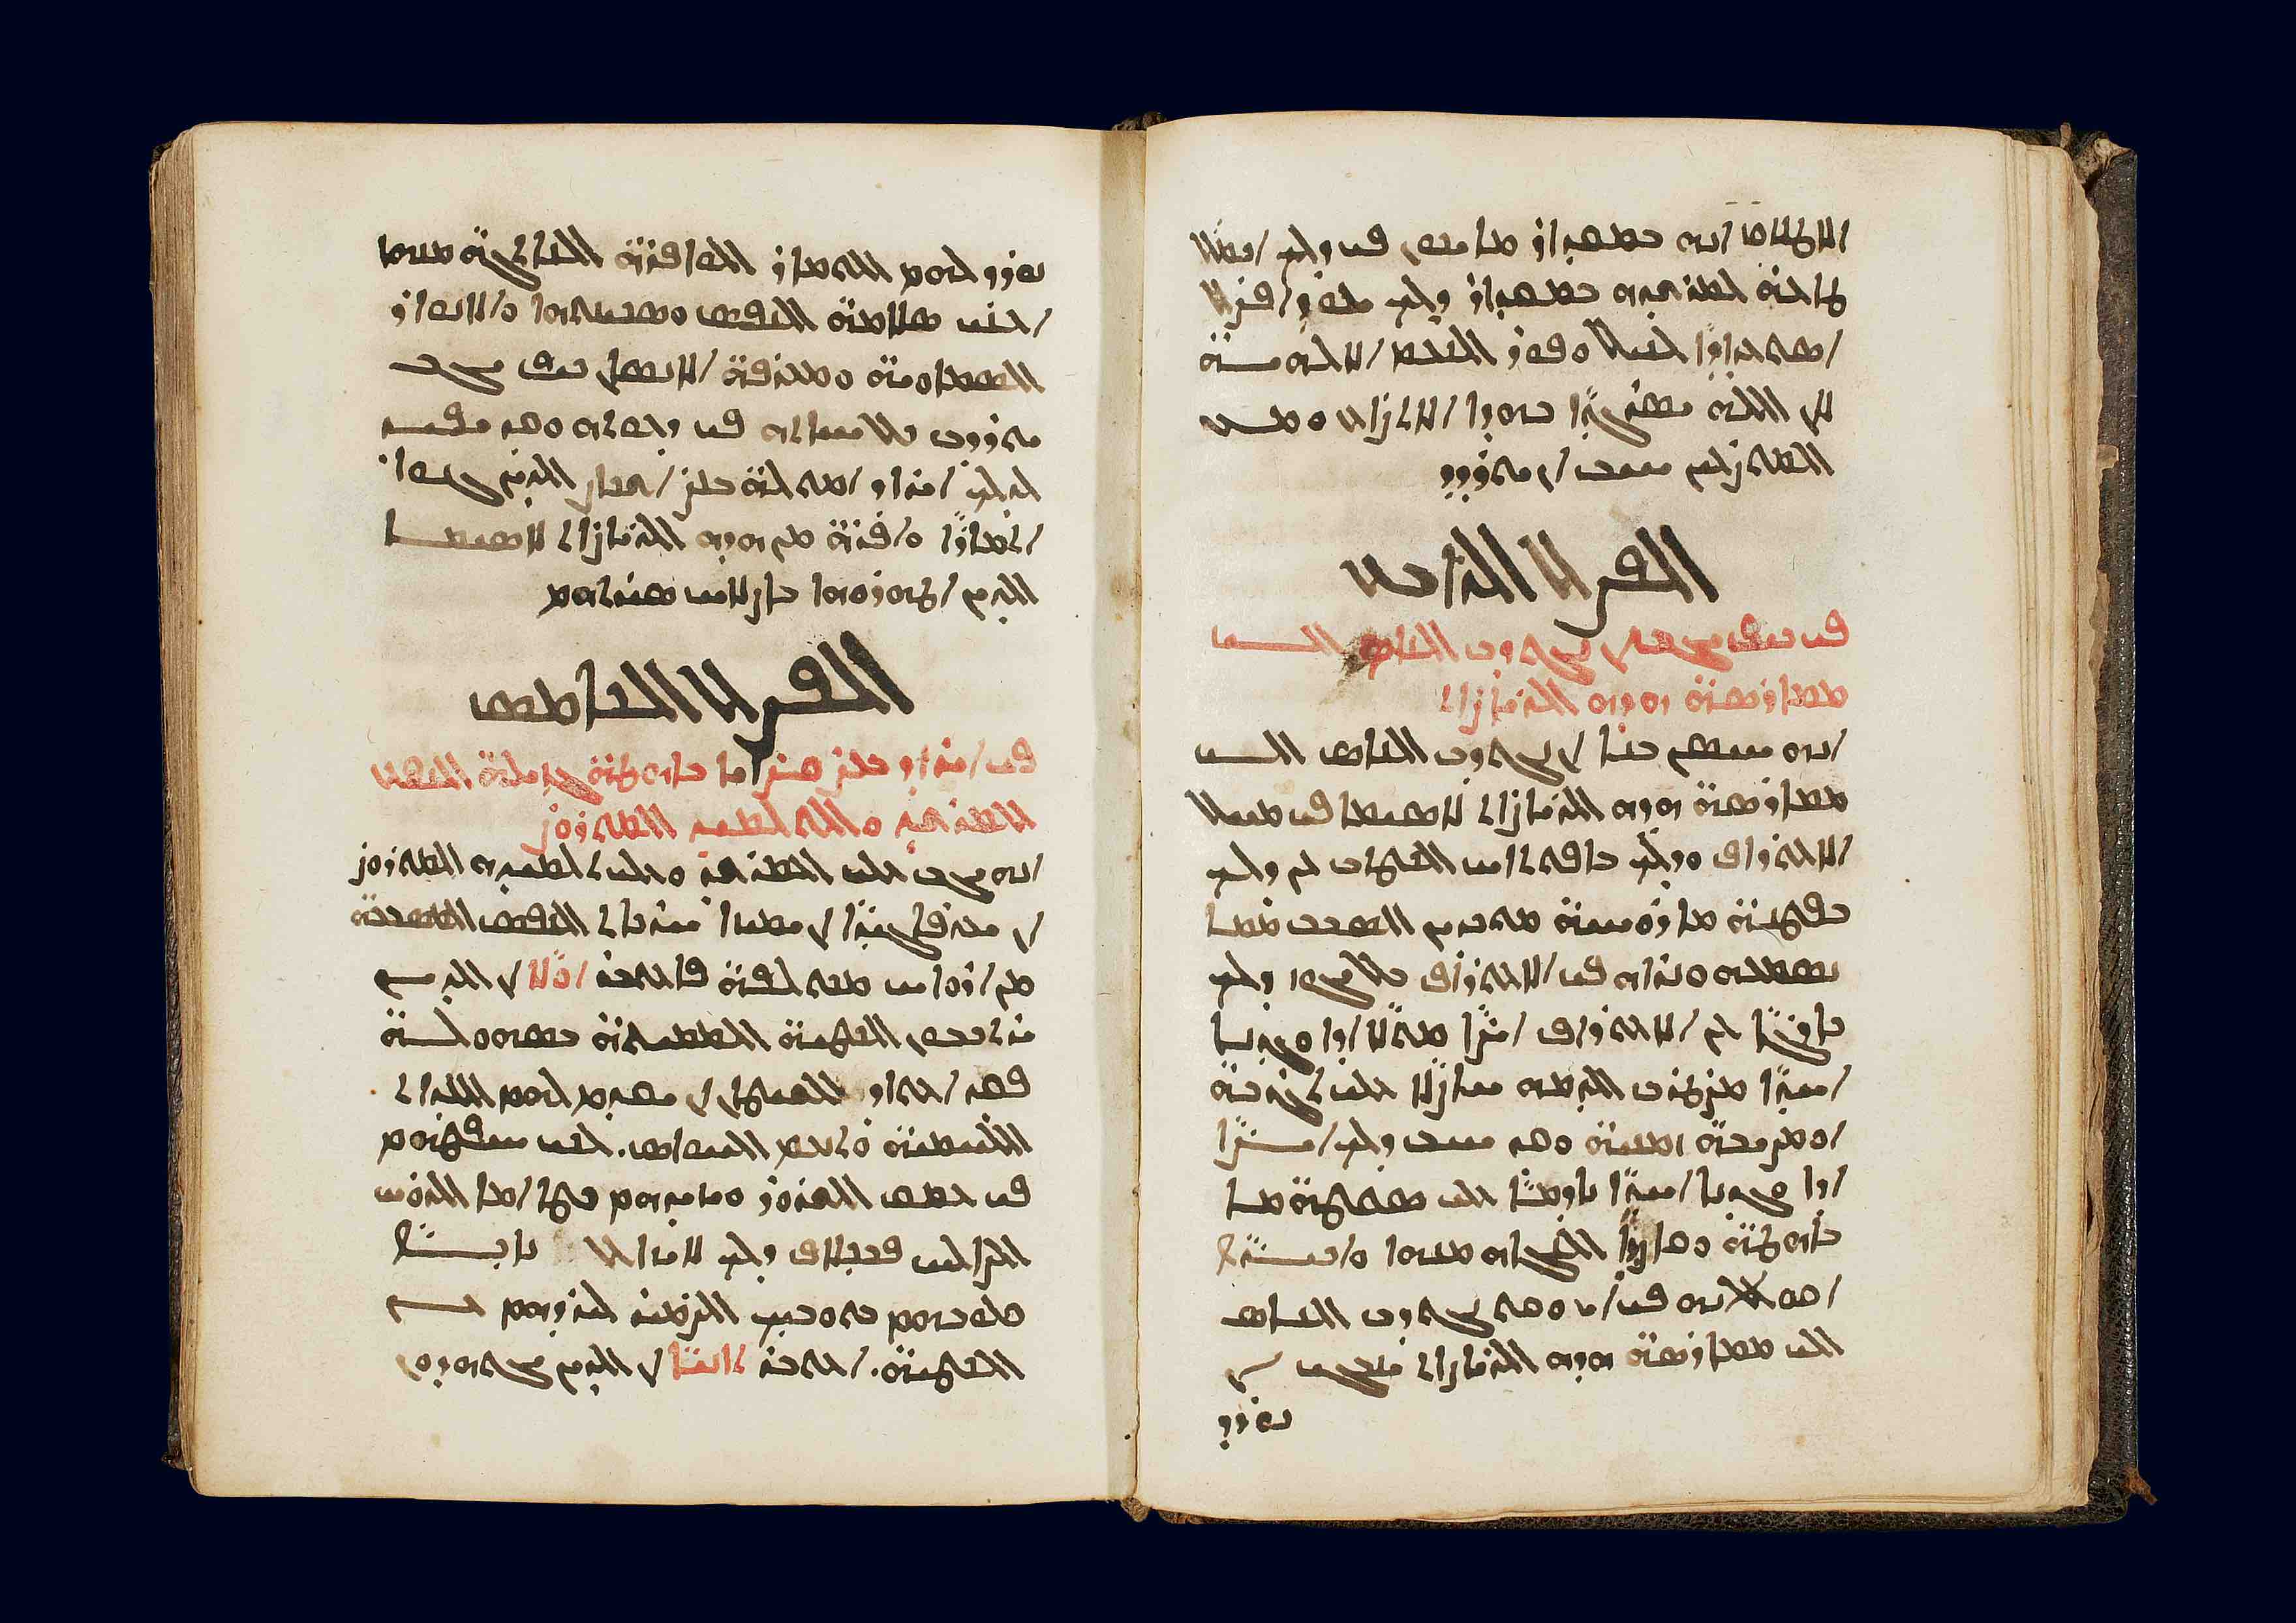 Manuscript from the Lebanese Maronite Order collection, Kaslik (<a href='https://w3id.org/vhmml/readingRoom/view/507698'>OLM 322</a>)